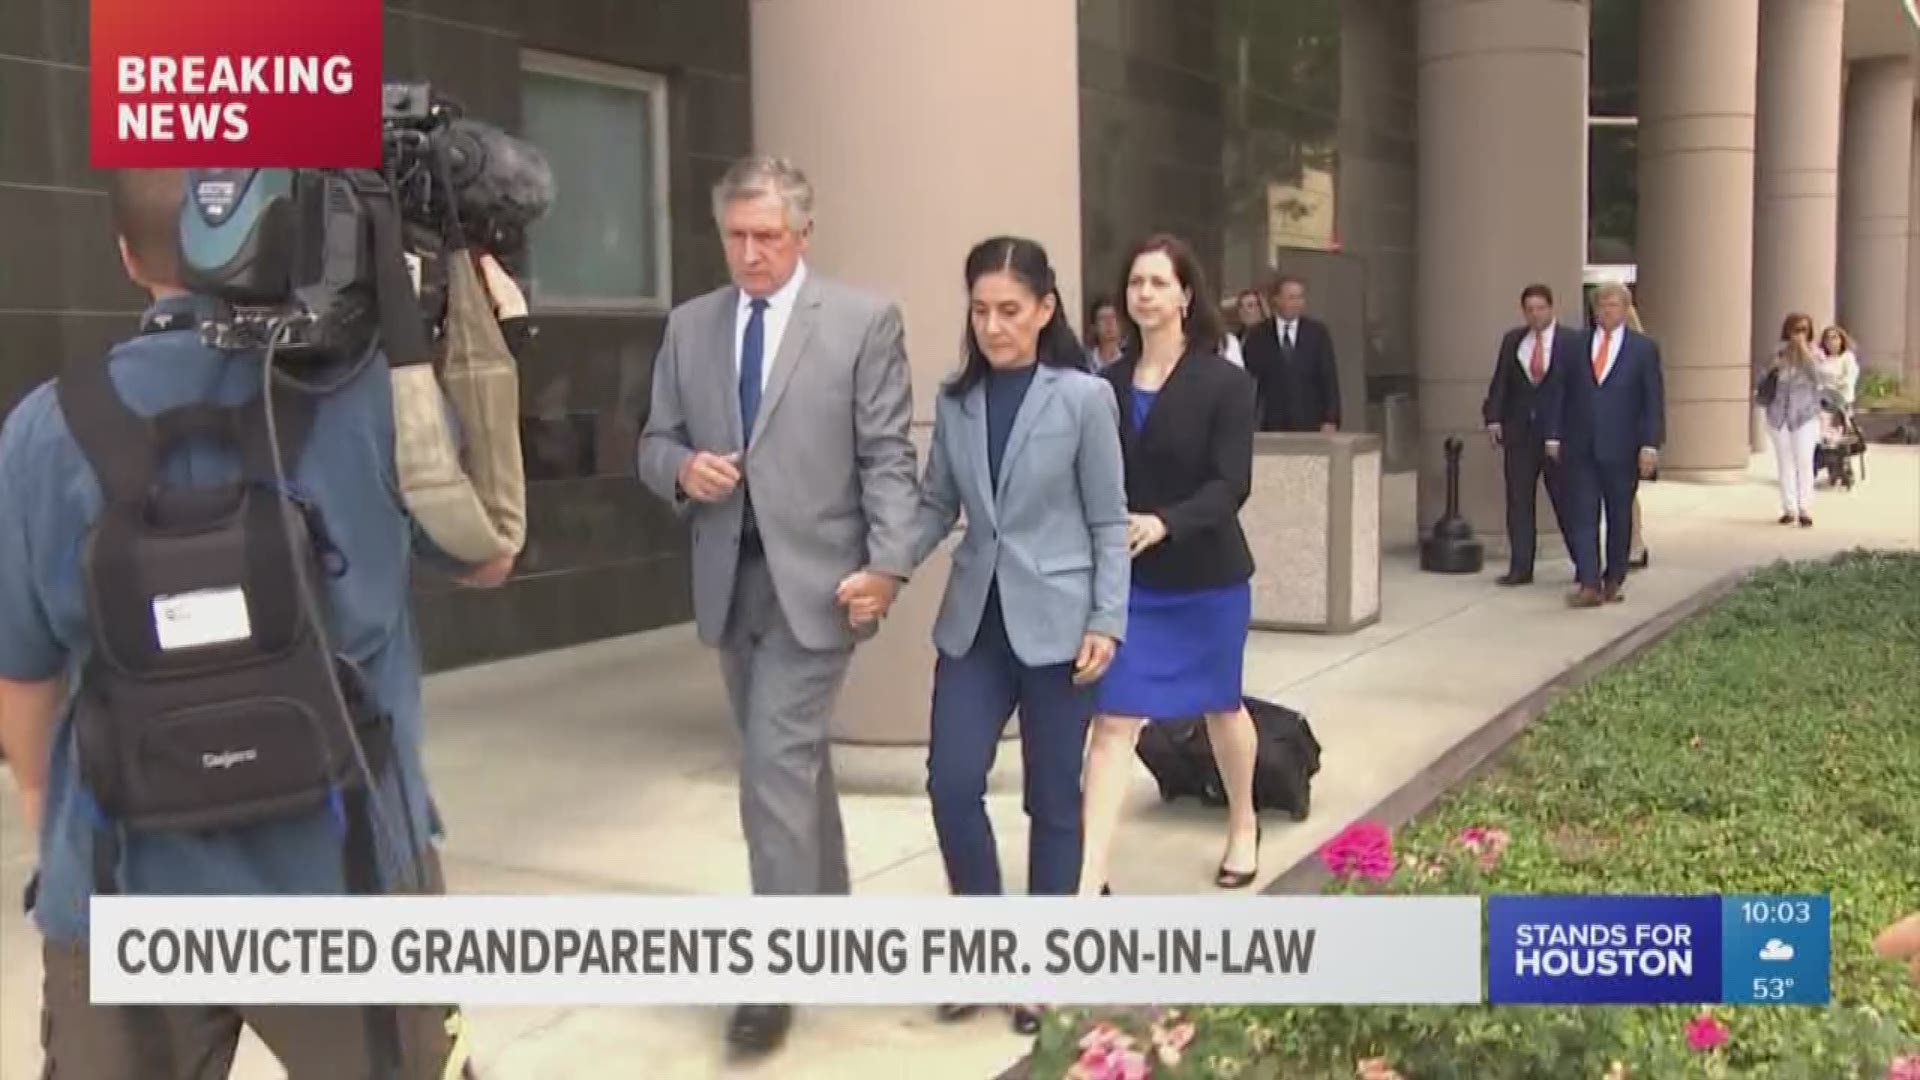 The Brazilian grandparents convicted of helping their daughter kidnap her son from Houston and take him to Brazil are now suing the boy's father.